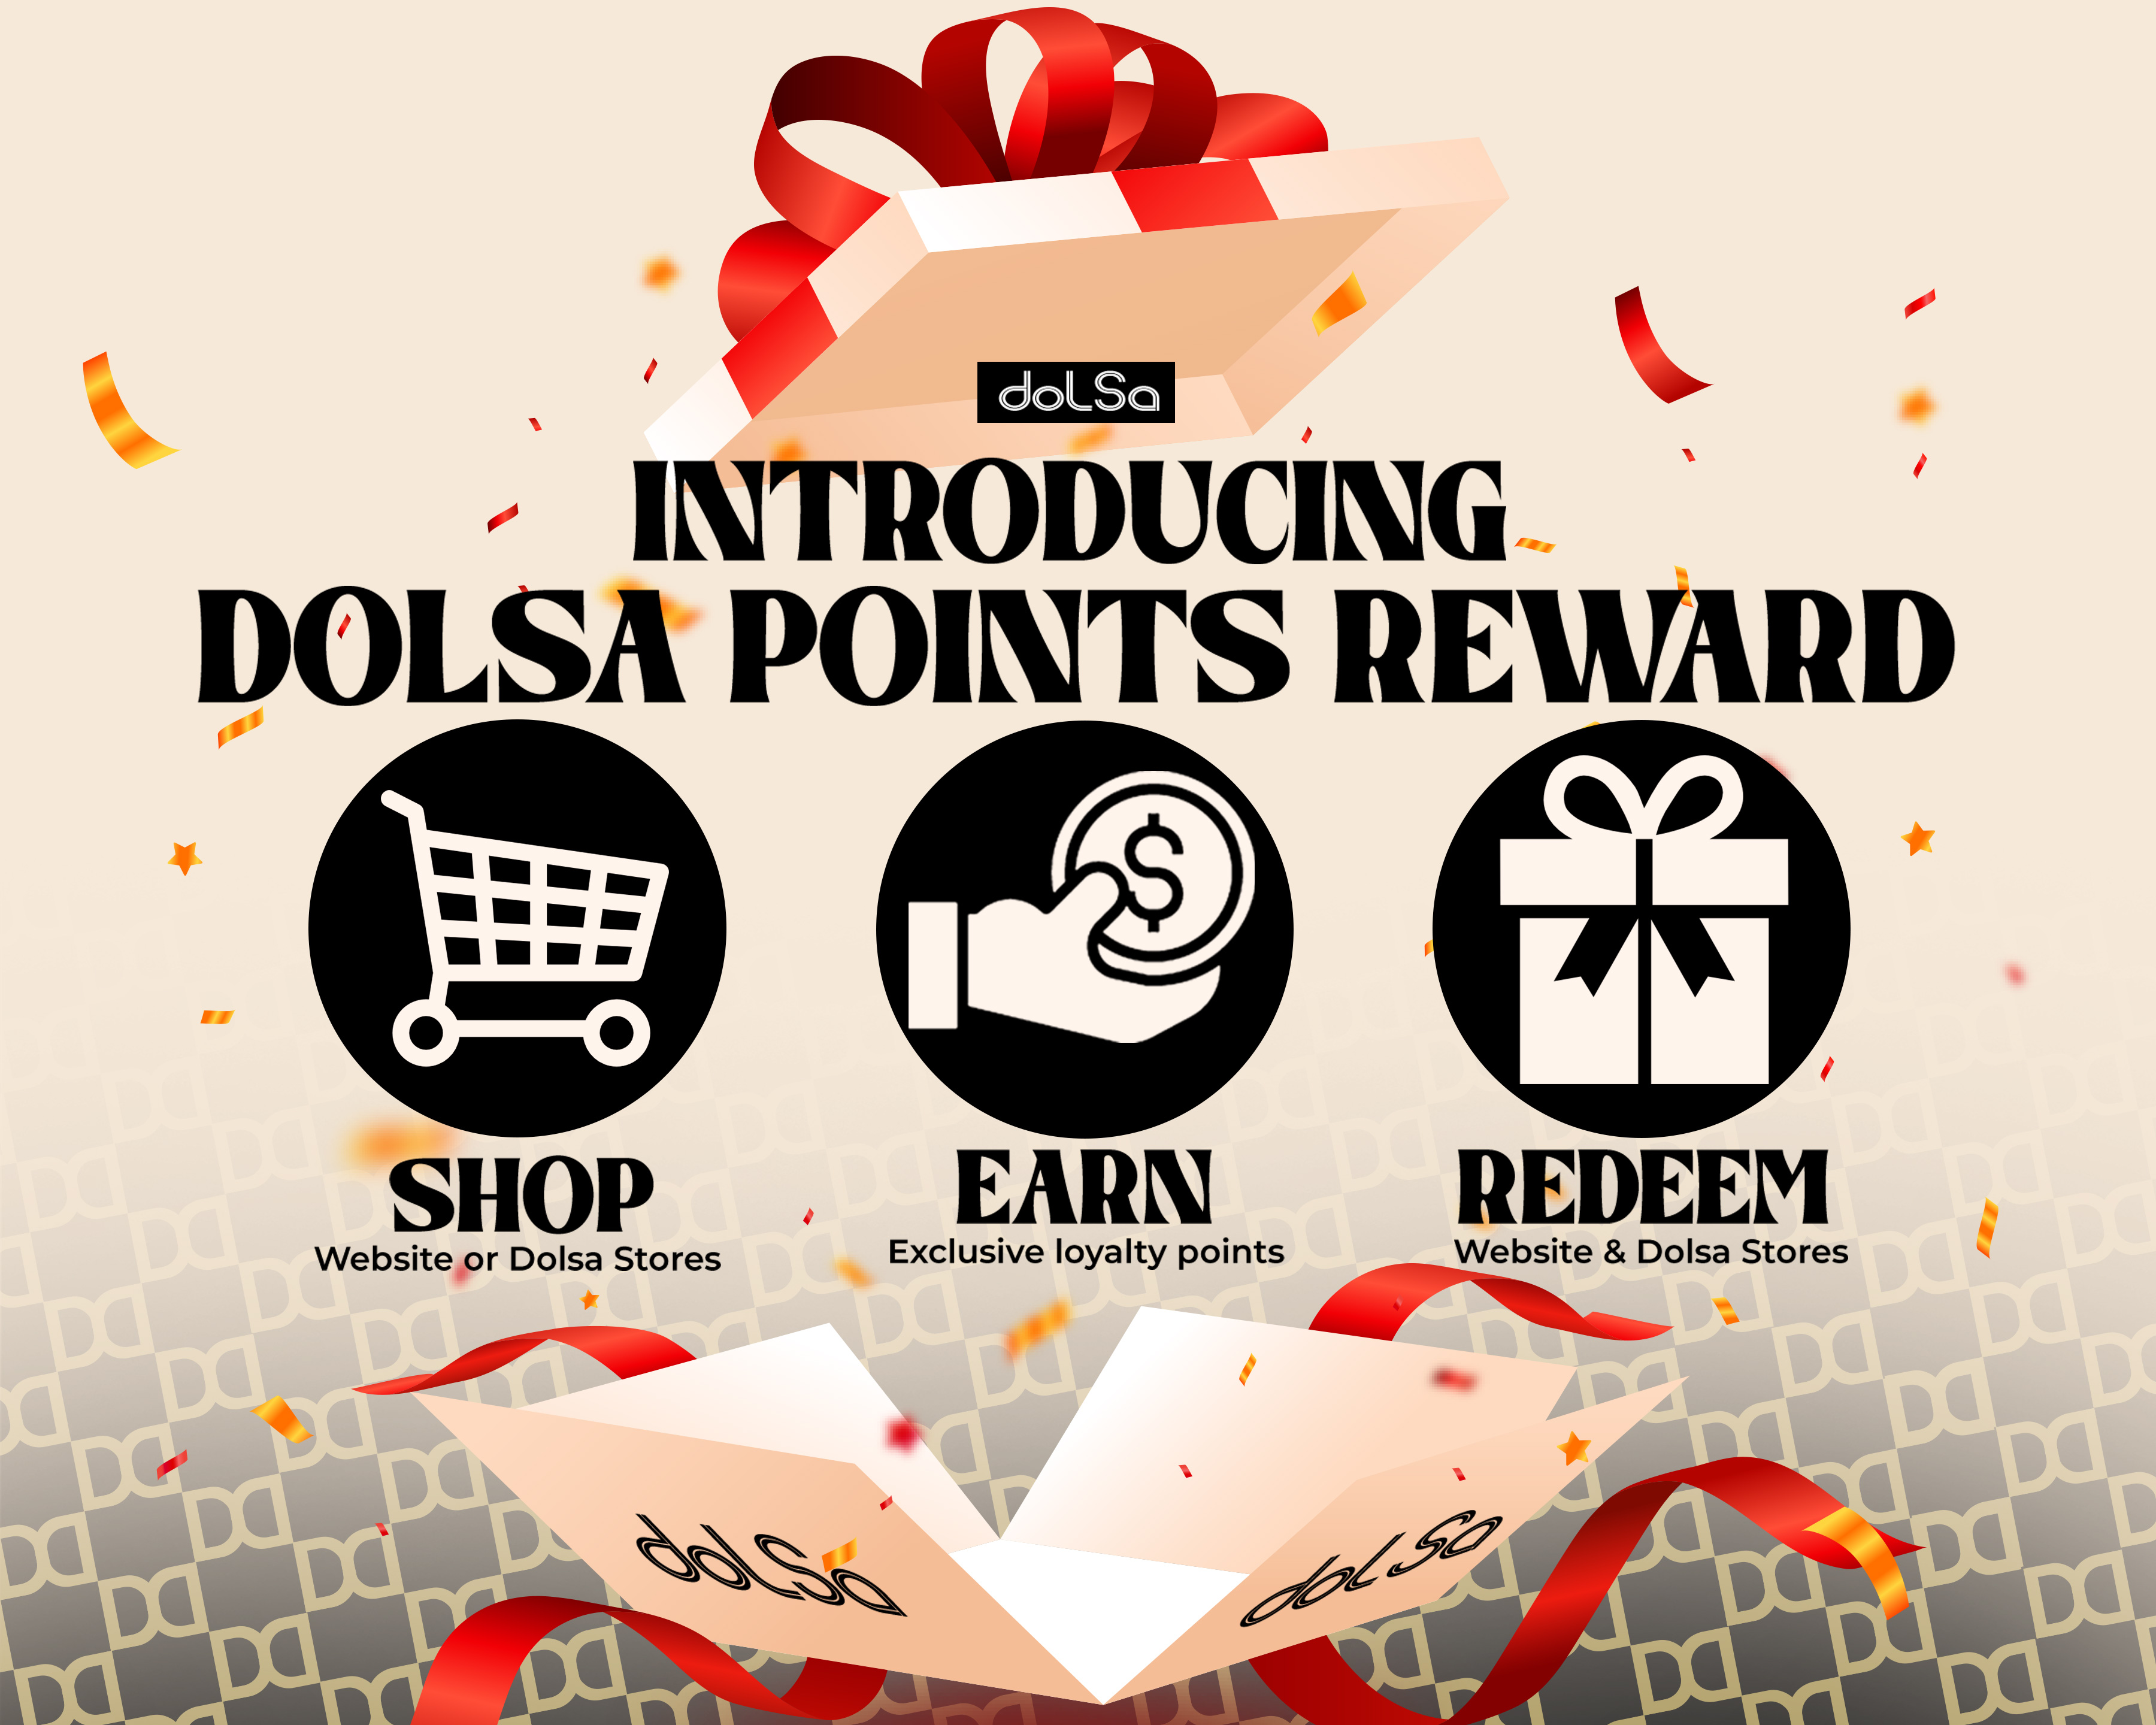 a Loyalty Program - Register Account to get points